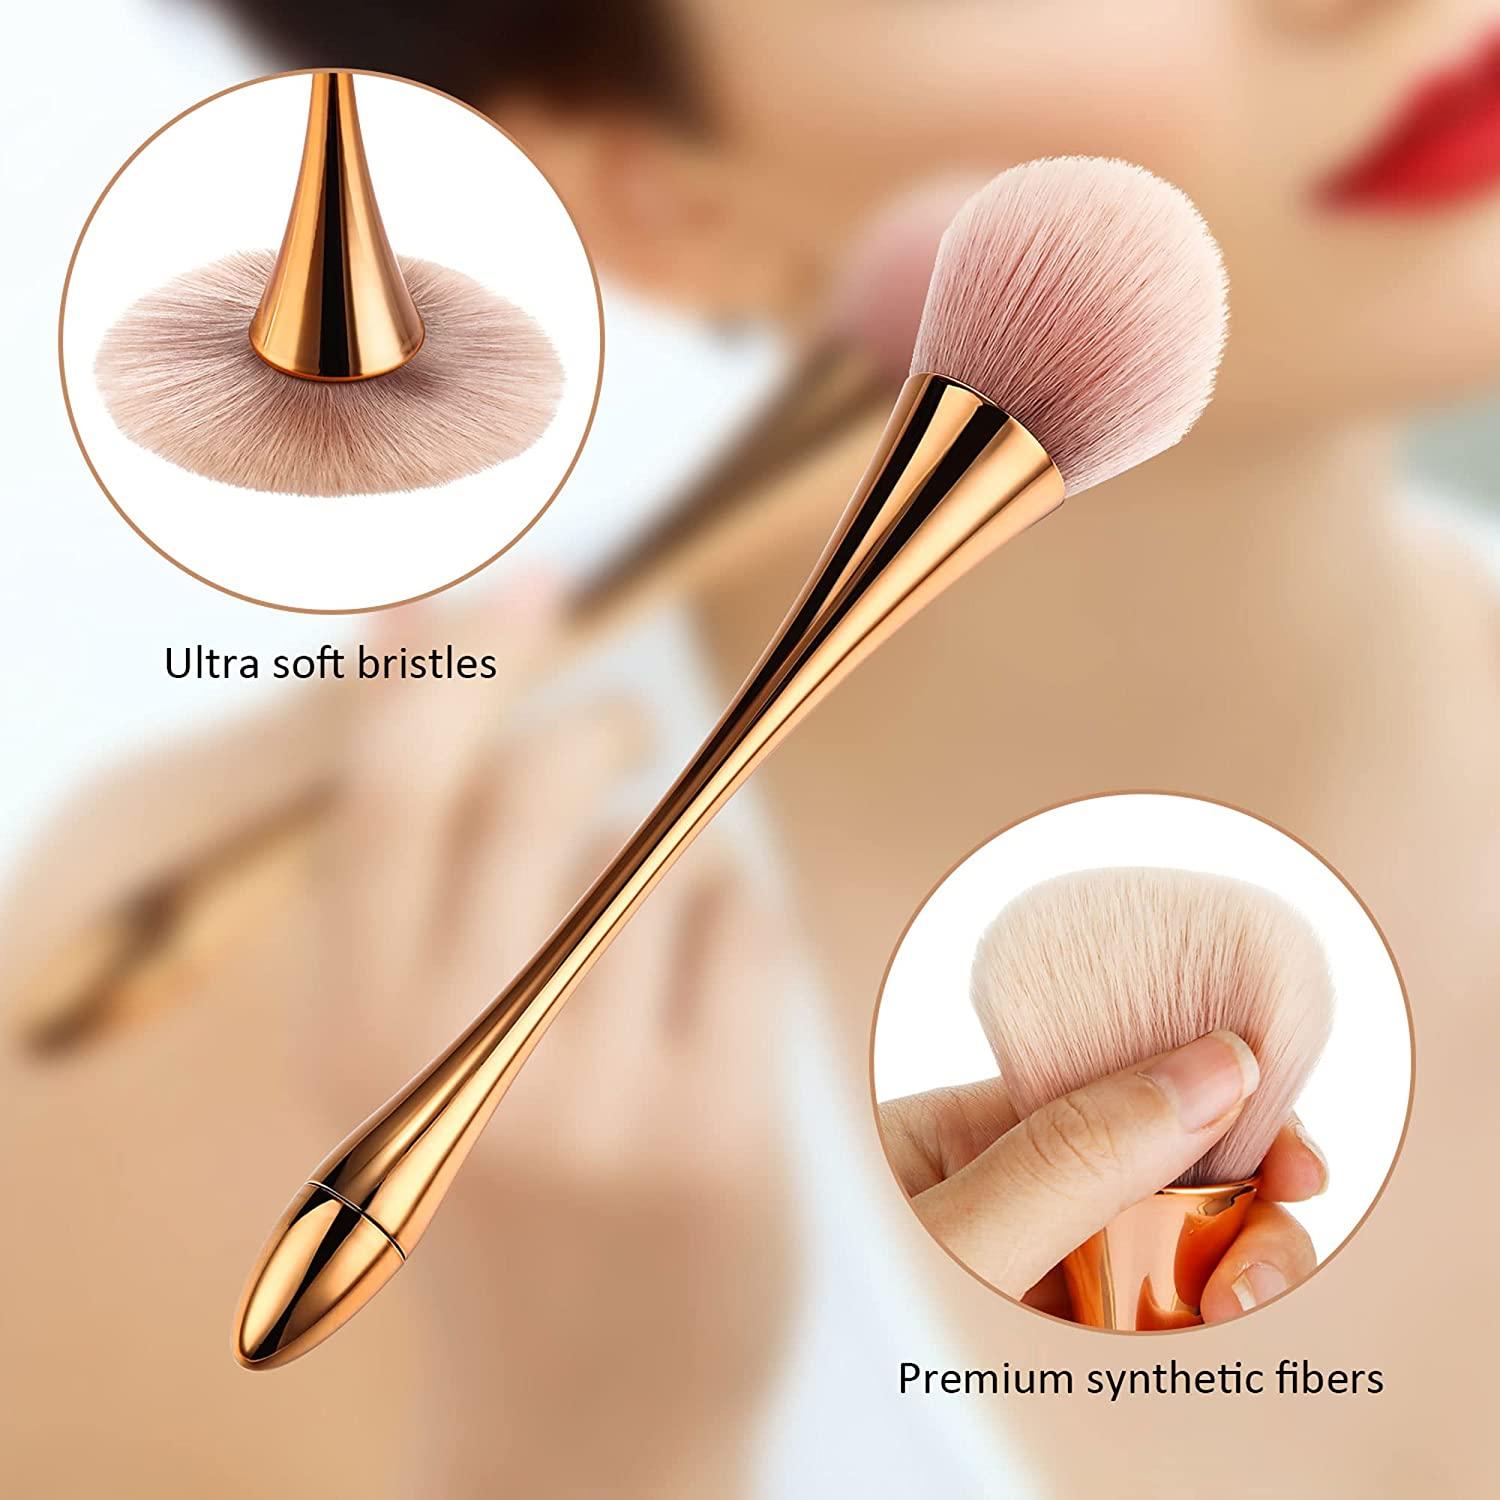 Ostrich Hair Loose Powder Brush With Glitter Setting Powder Box Fluffy  Makeup Brush For Highlighting And Flawless Application From Amy711, $4.92